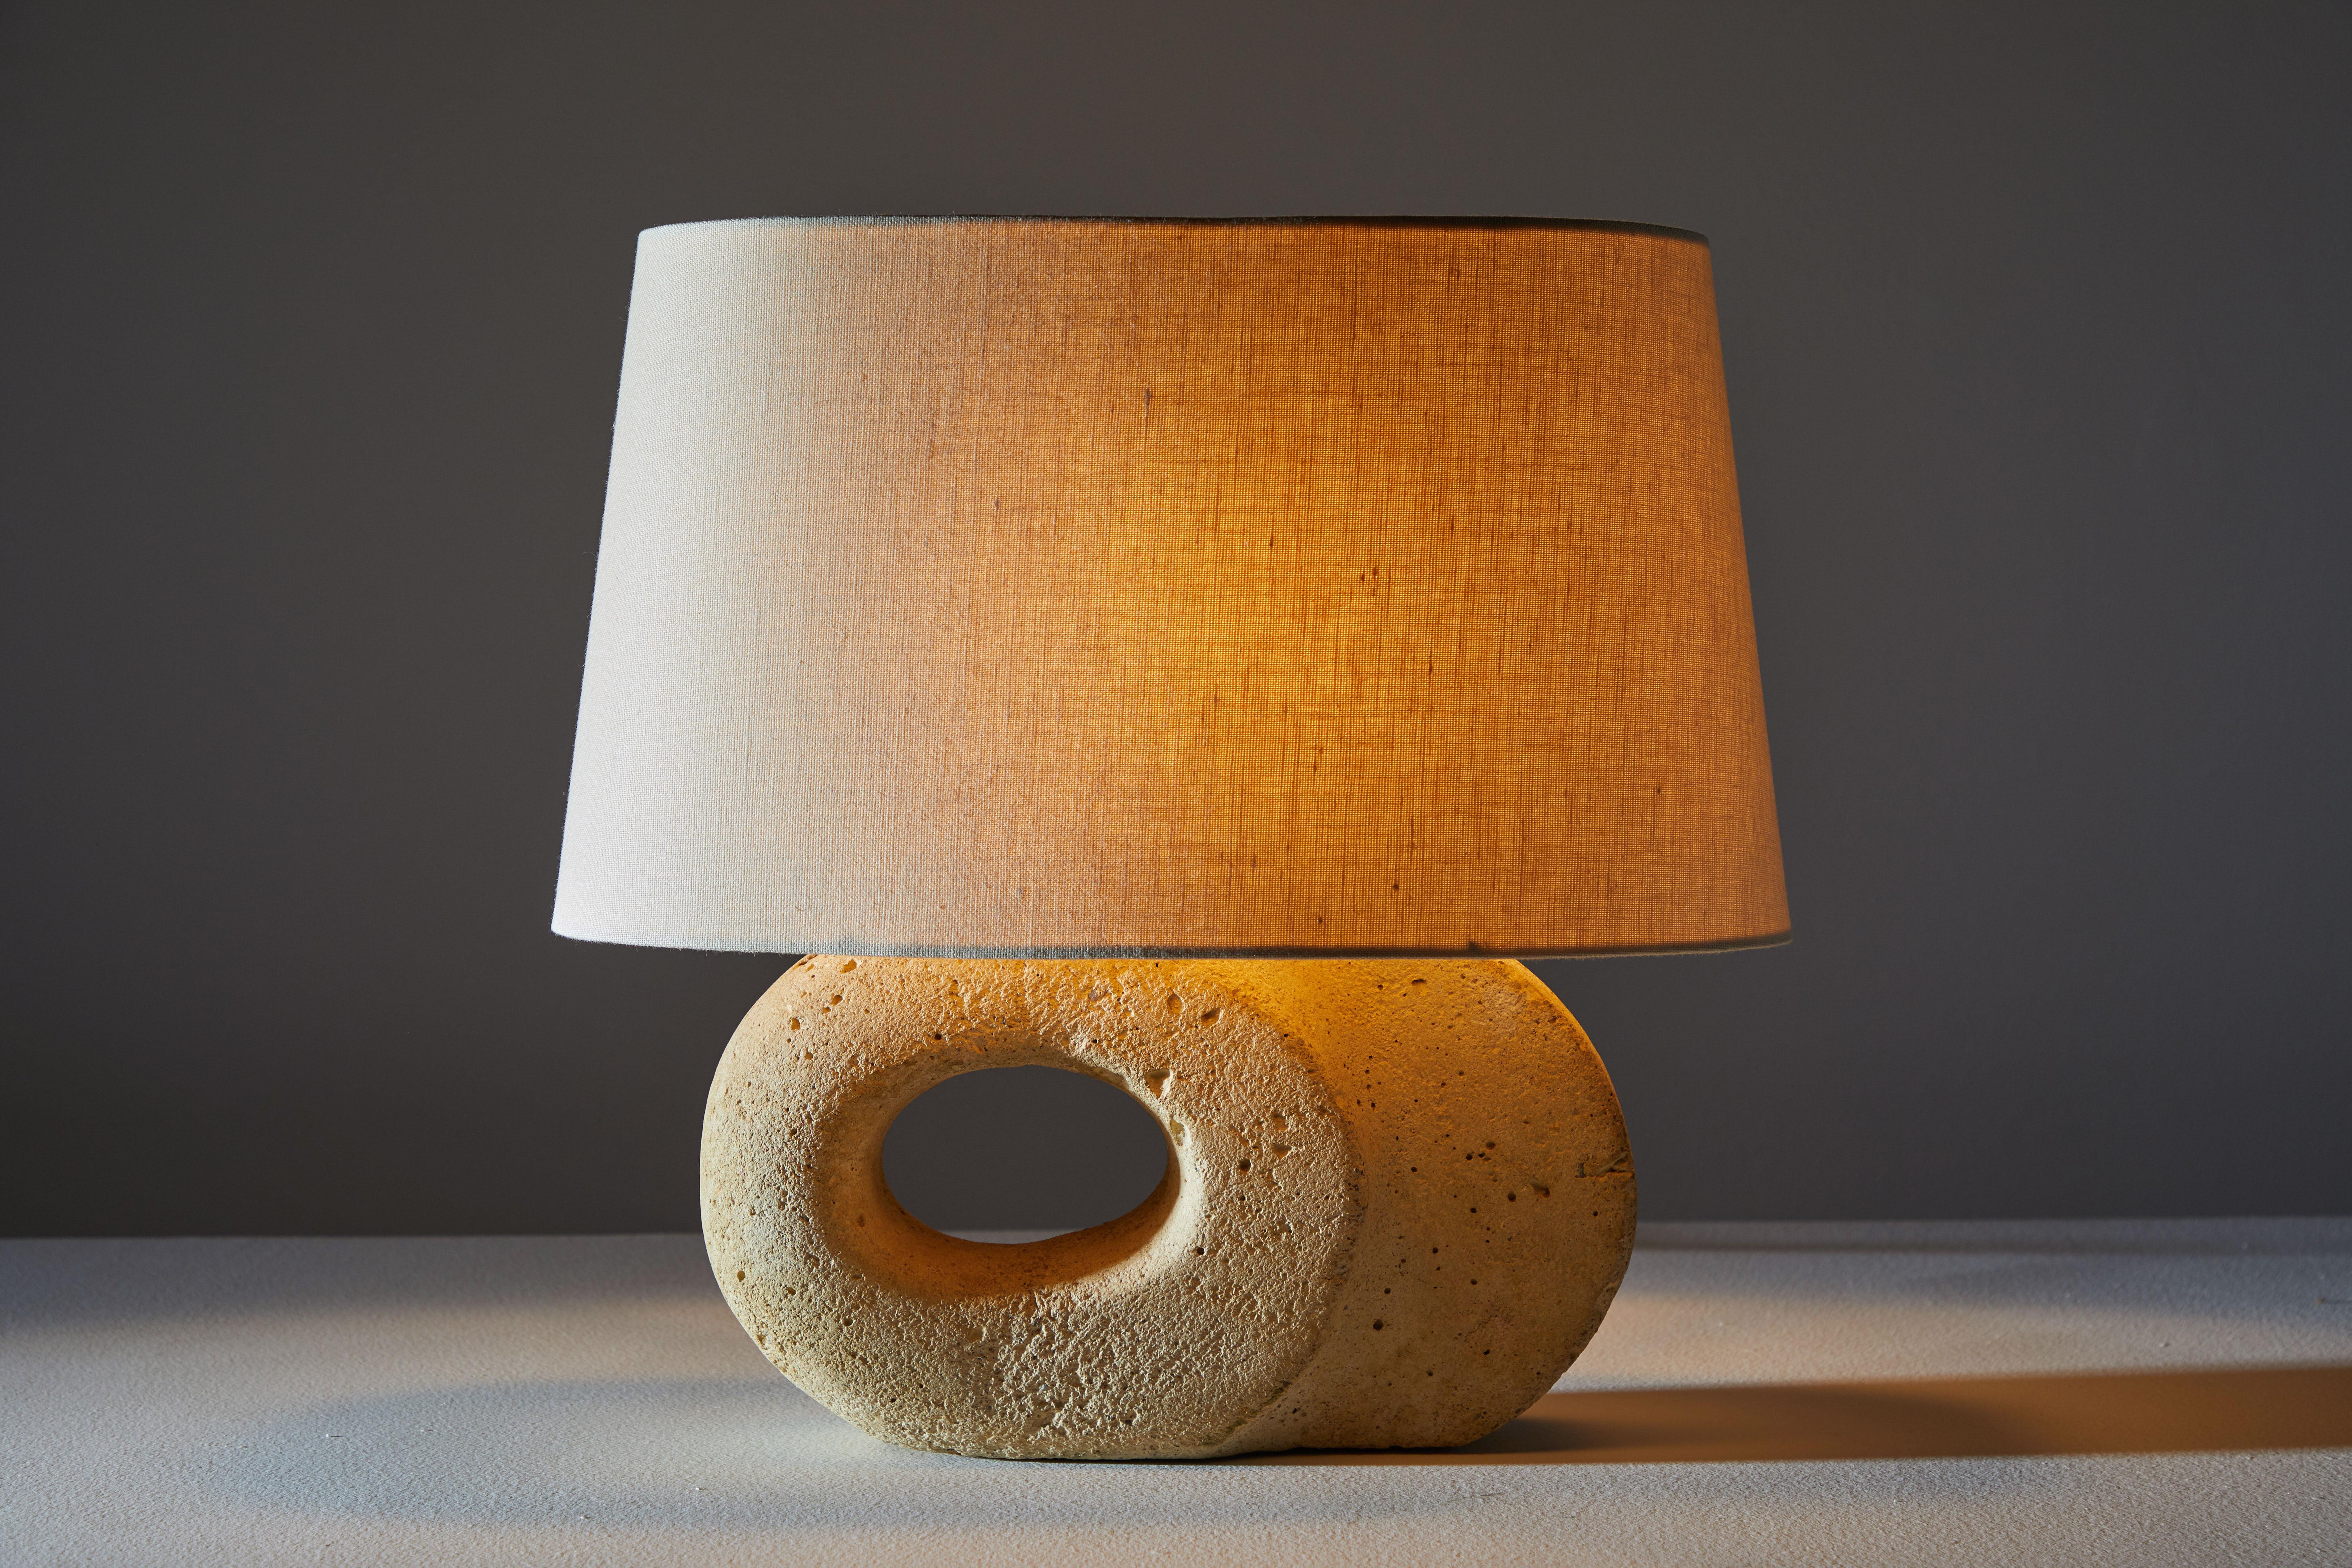 Table lamp. Manufactured in France, circa 1970s. Carved stone with custom linen shade. Original cord with hand on/off switch. Height displayed includes shade. Height of fixture is 9